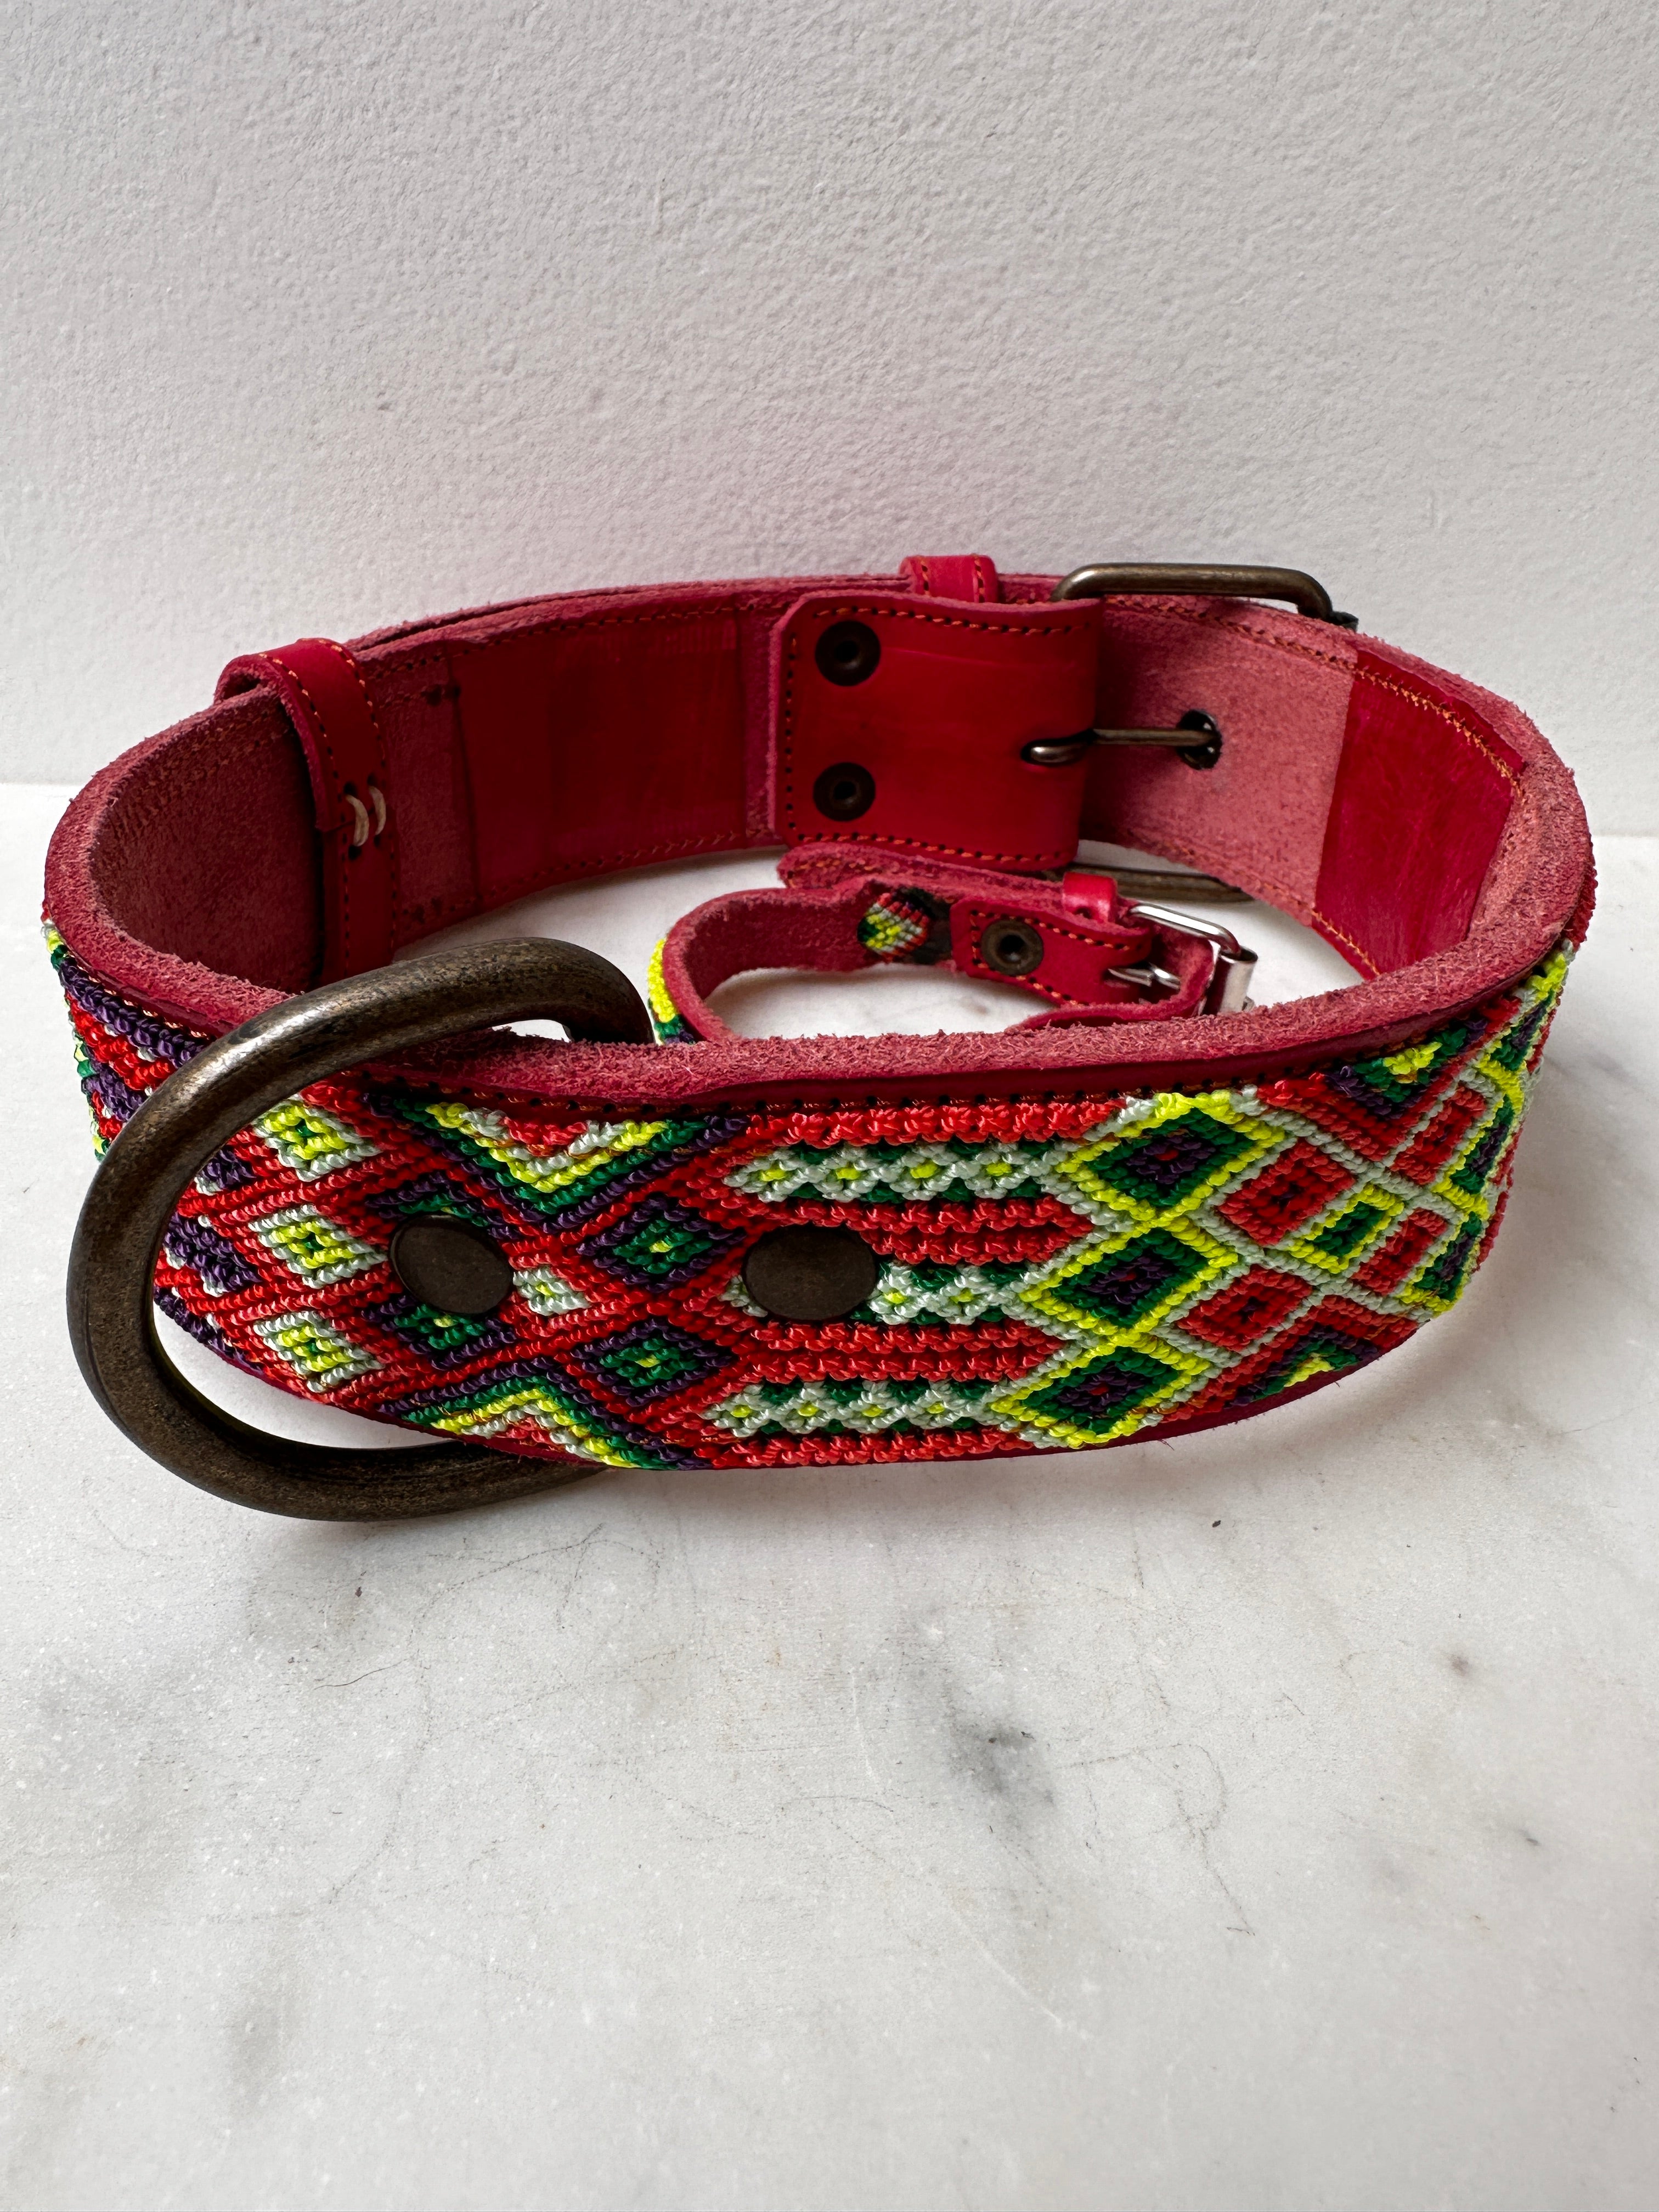 Future Nomads Homewares One Size Huichol Leather Wide Dog Collar L6